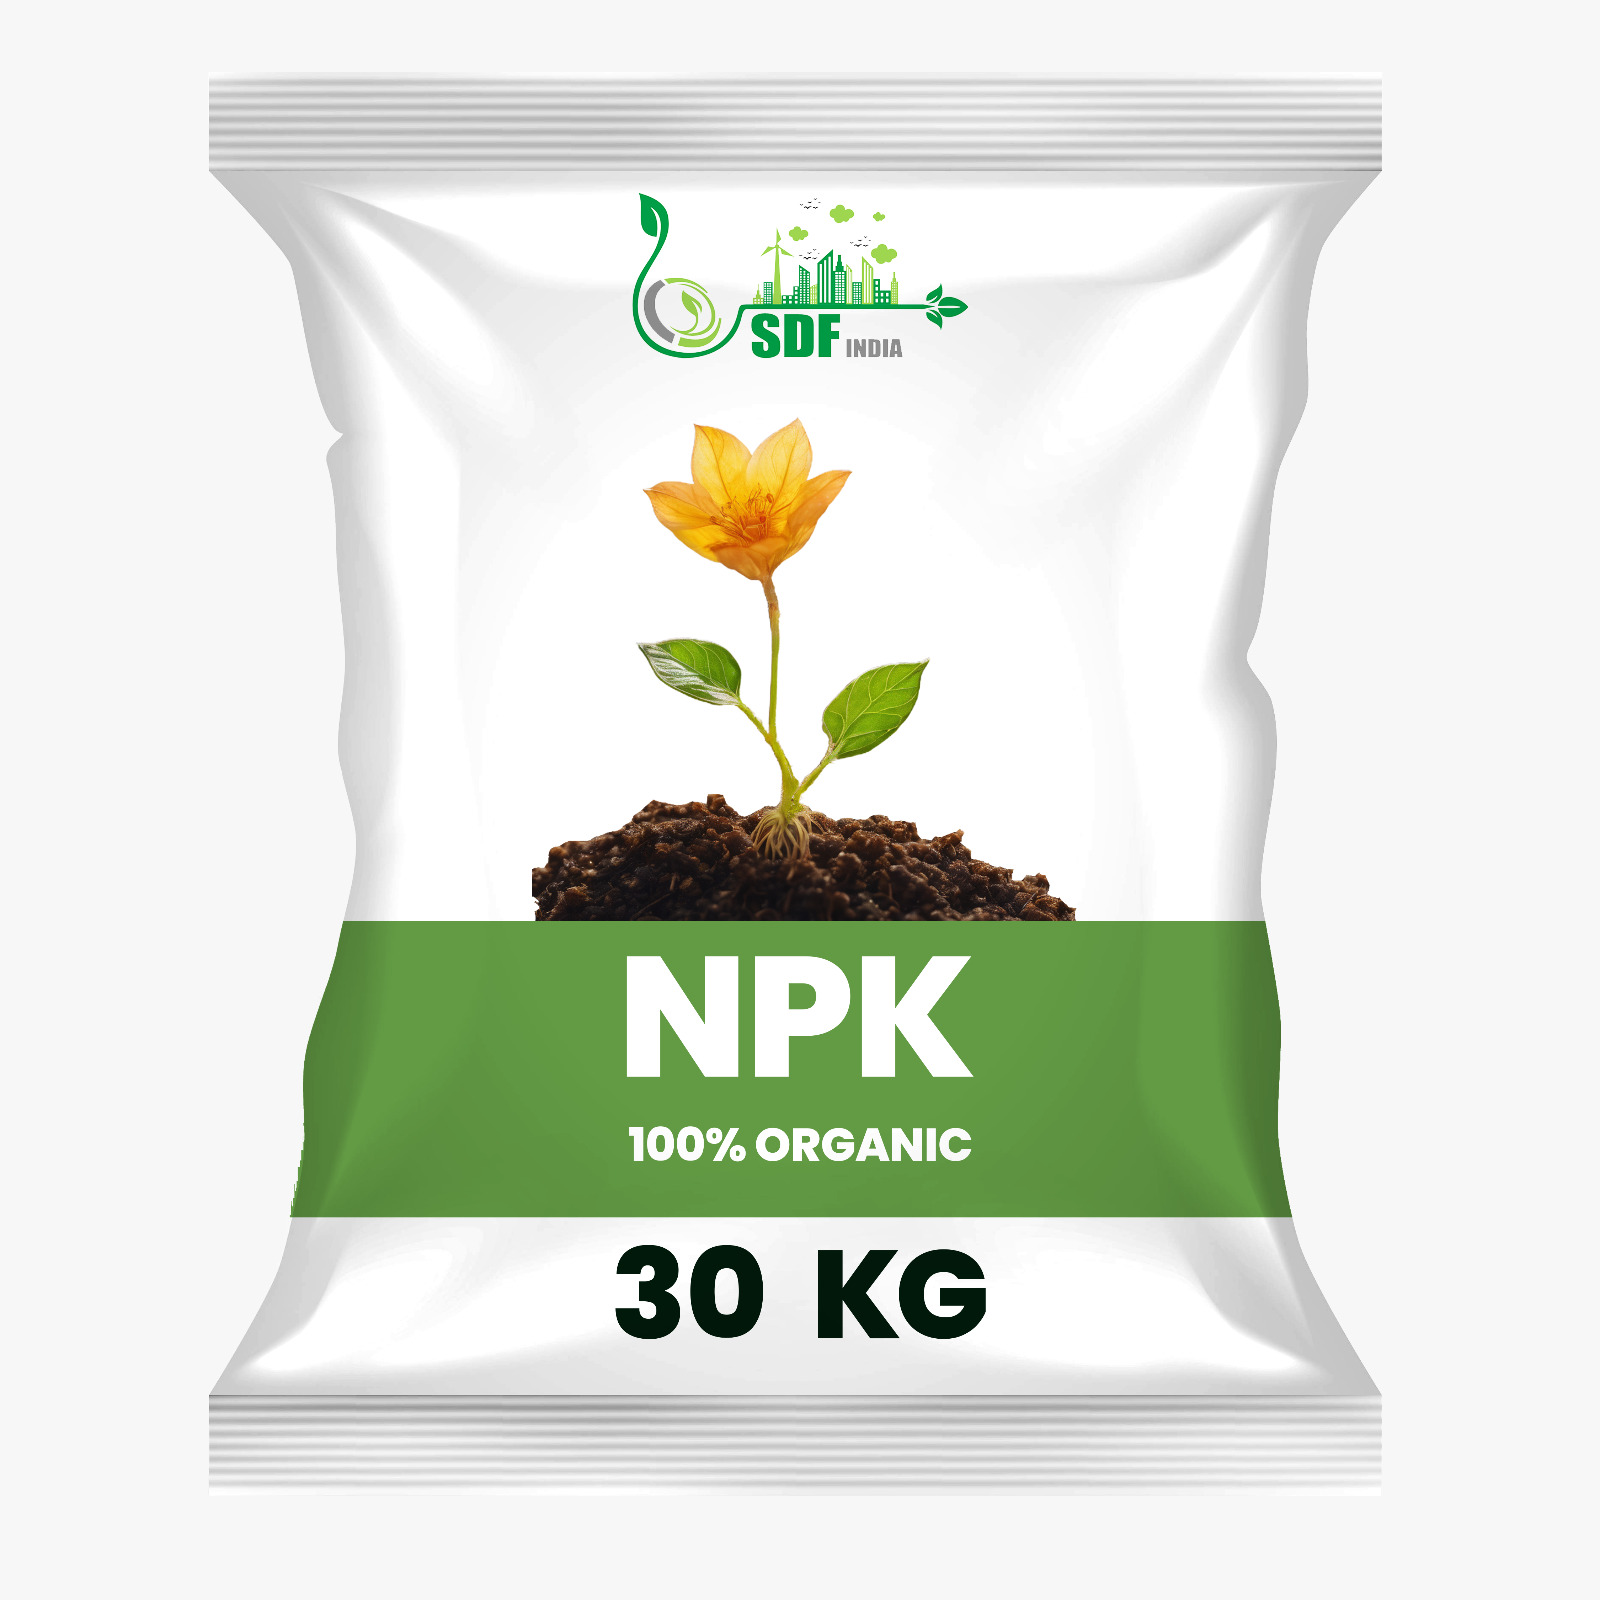 sdfindia npk pure and organic product 30 kg